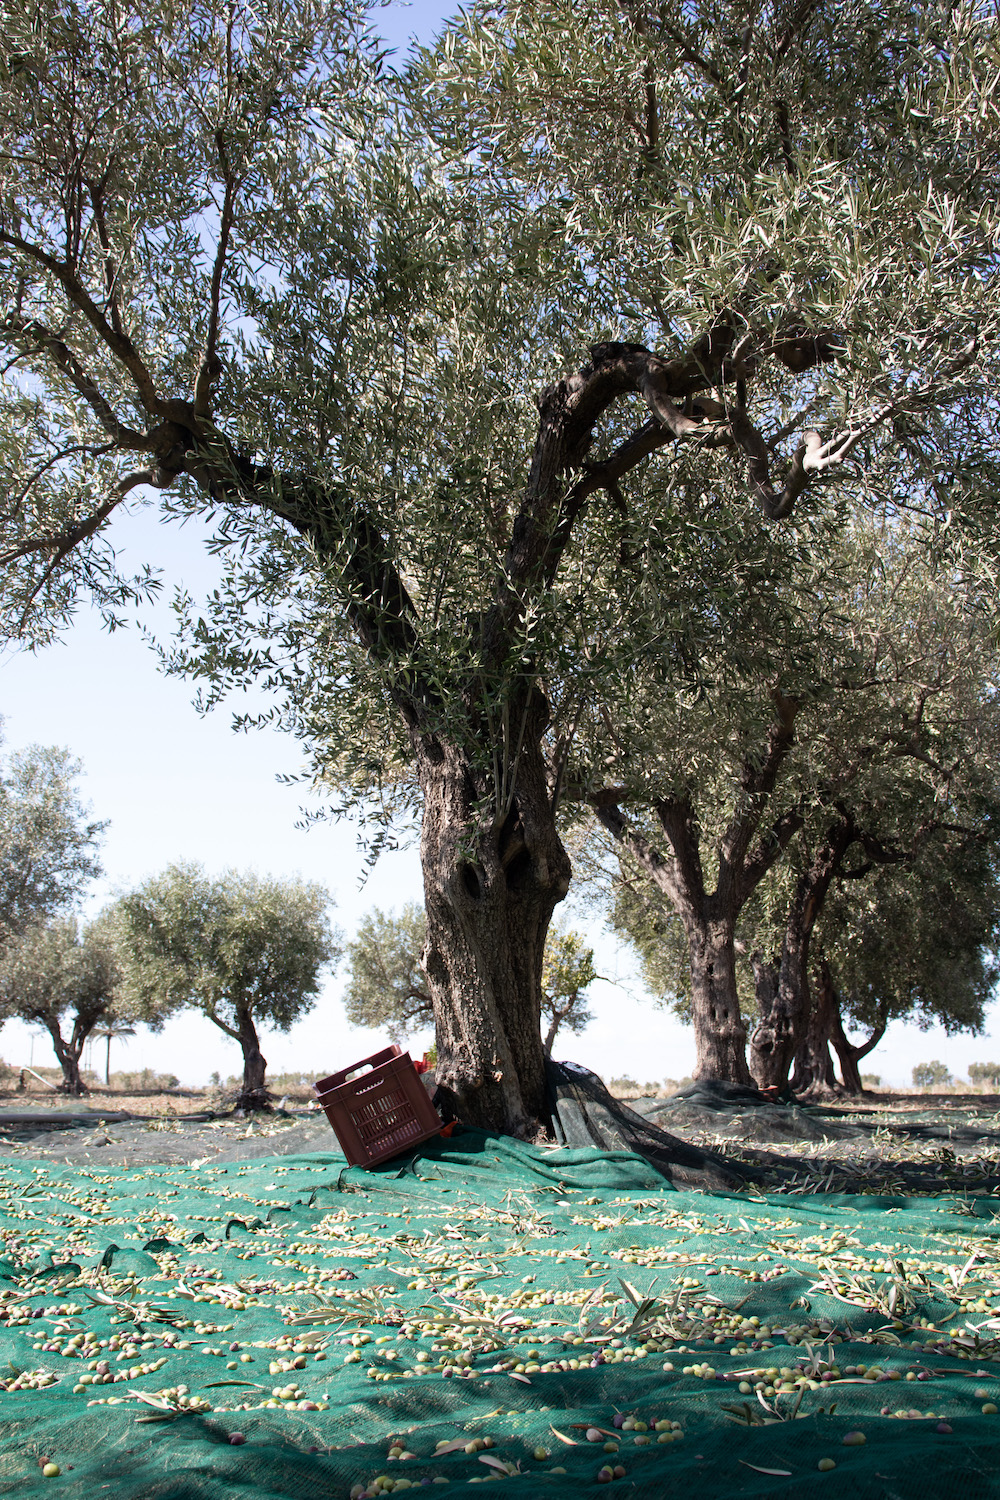 The truth about olive oil from Italy – EXAU Olive Oil